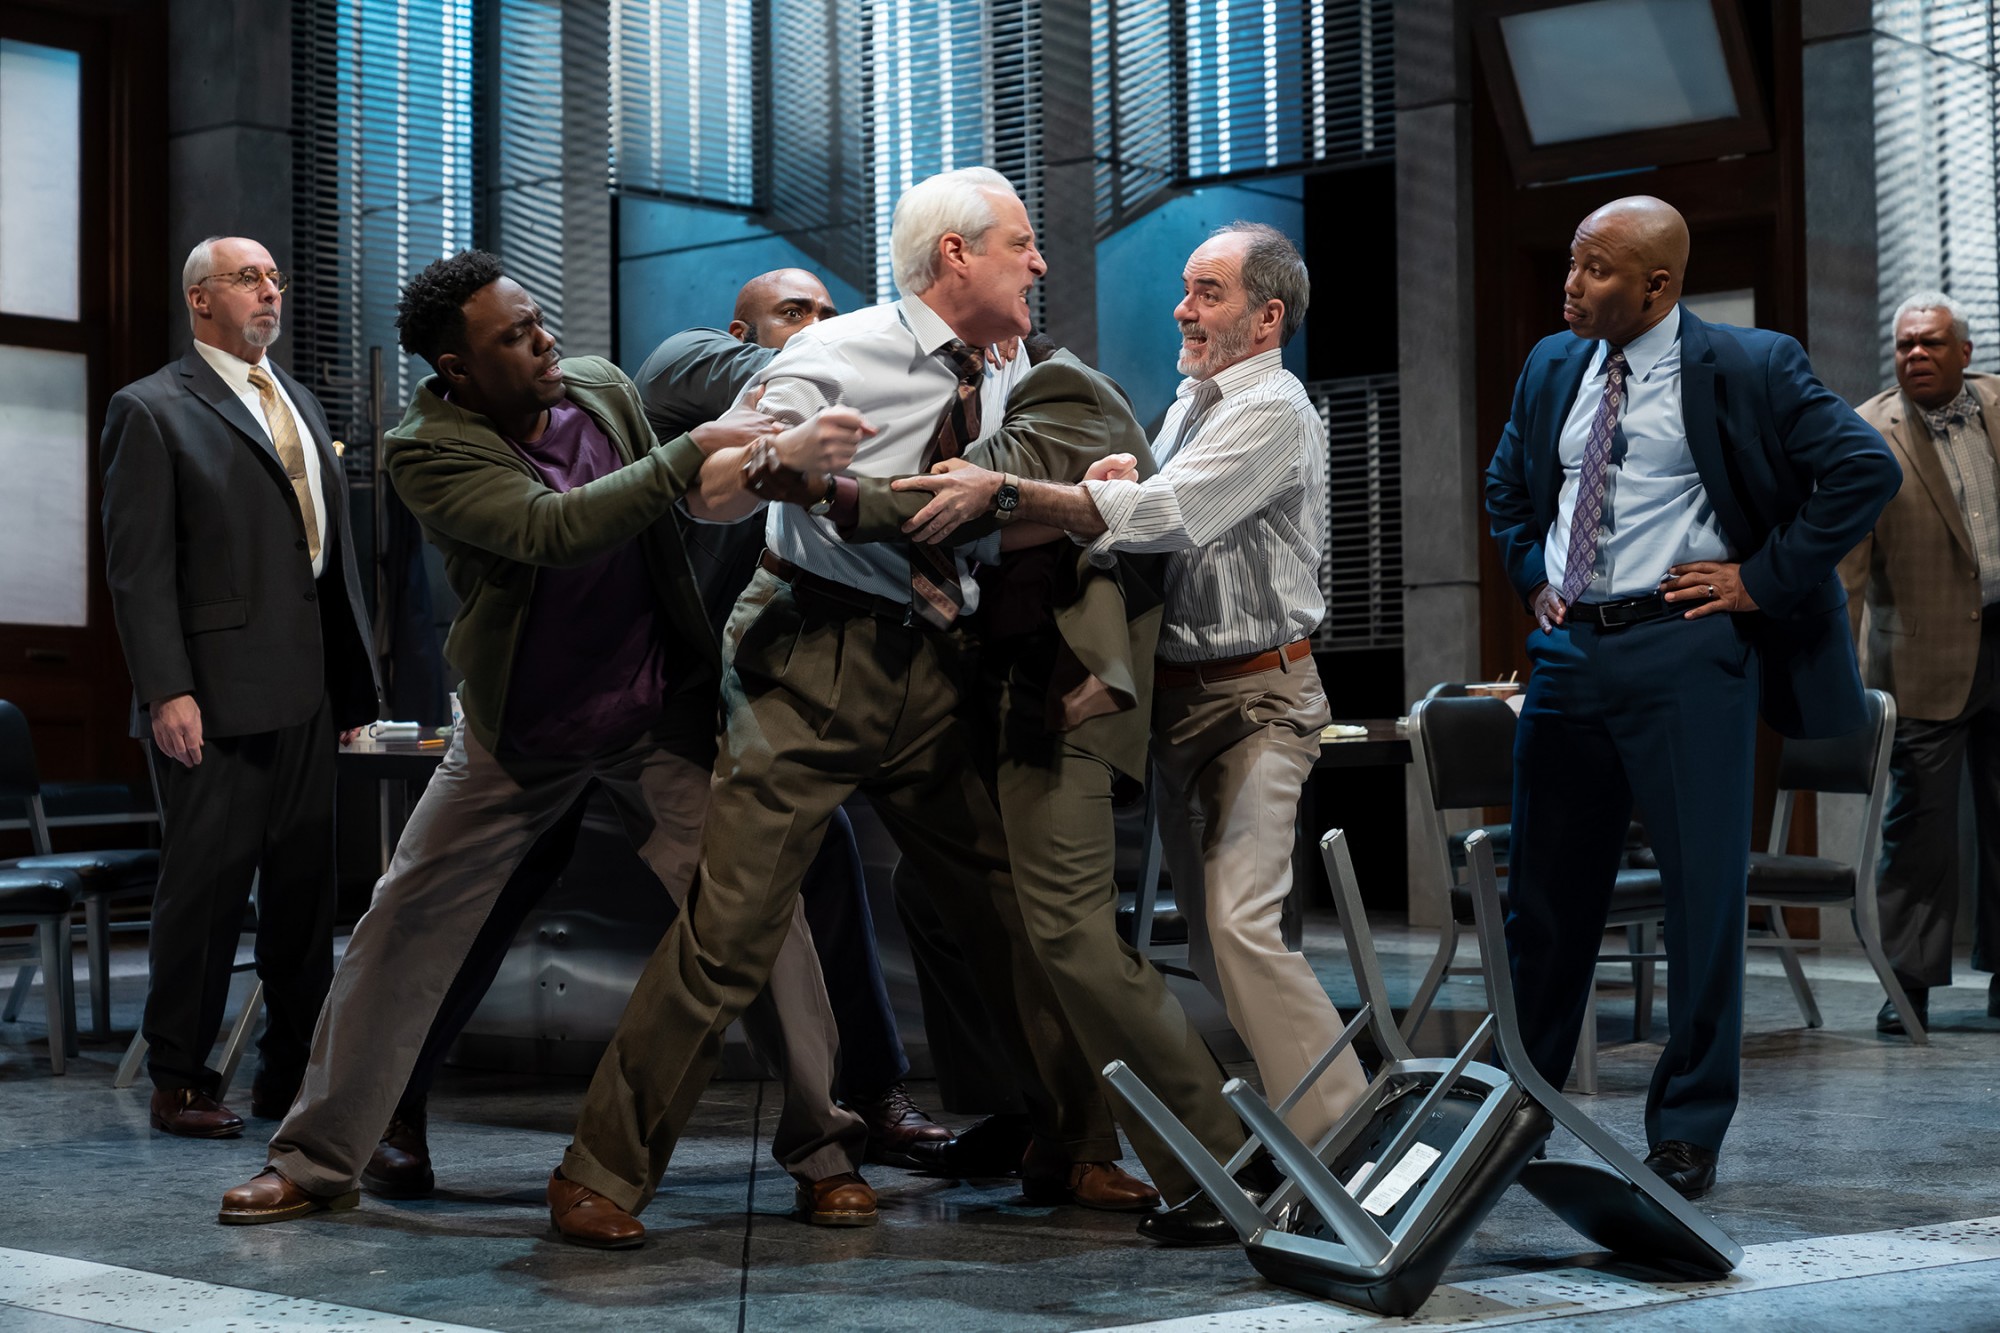 Four men physically restrain an angry man who lunges with fists clenched toward another man in a jury room. Image is from the Ford’s Theatre 2019 production of Twelve Angry Men, directed by Sheldon Epps. Photo by Scott Suchman.